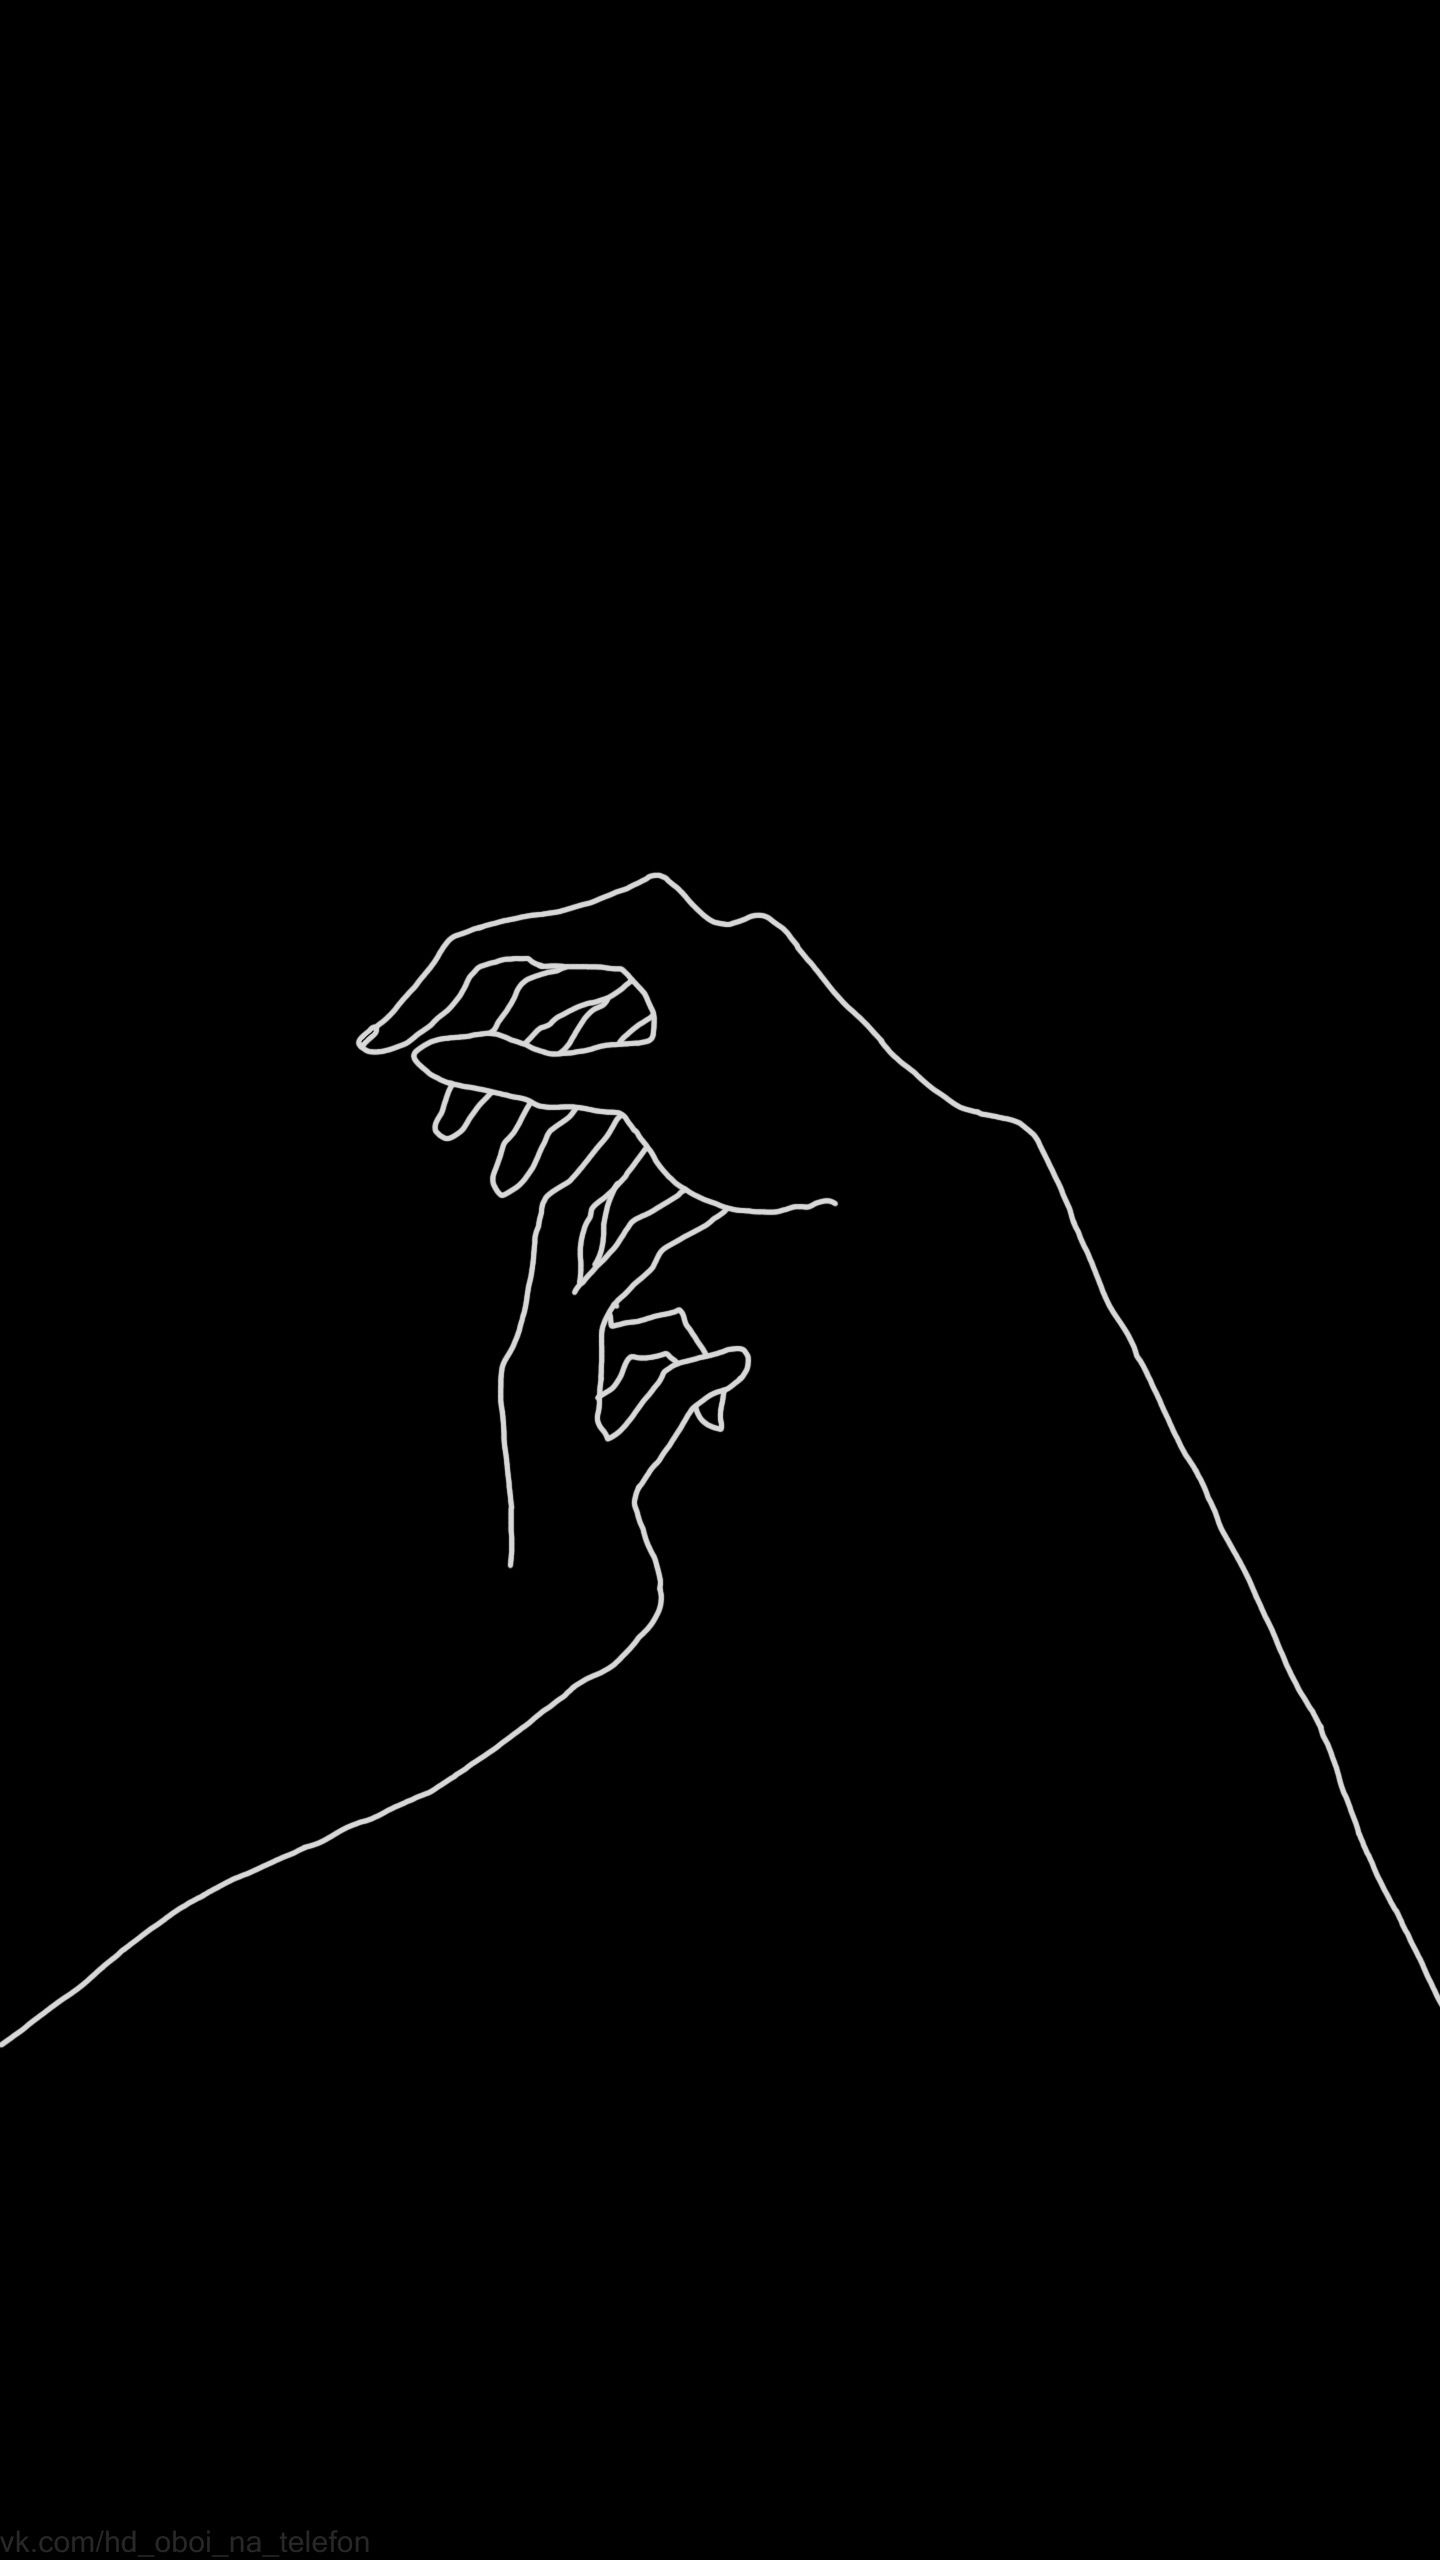 A hand holding another one in the dark - Black and white